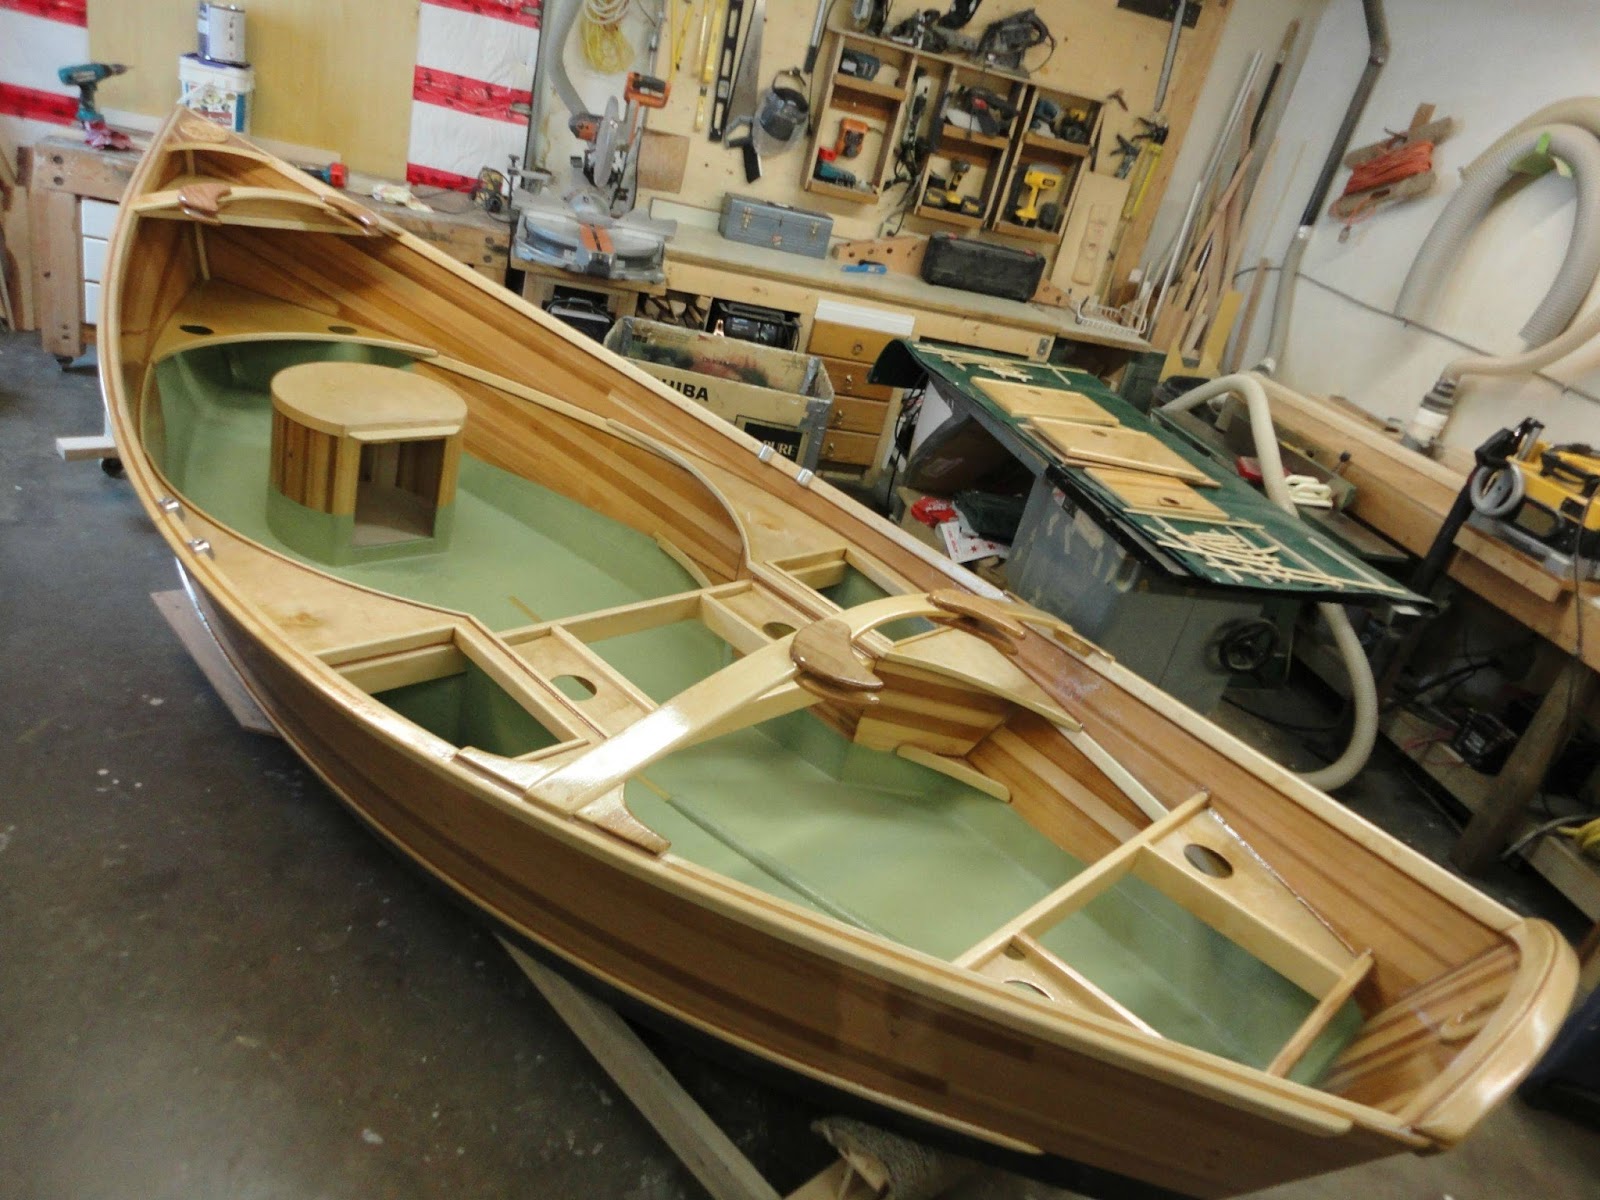 how to build boats: malahini plywood runabout boat plans 245f